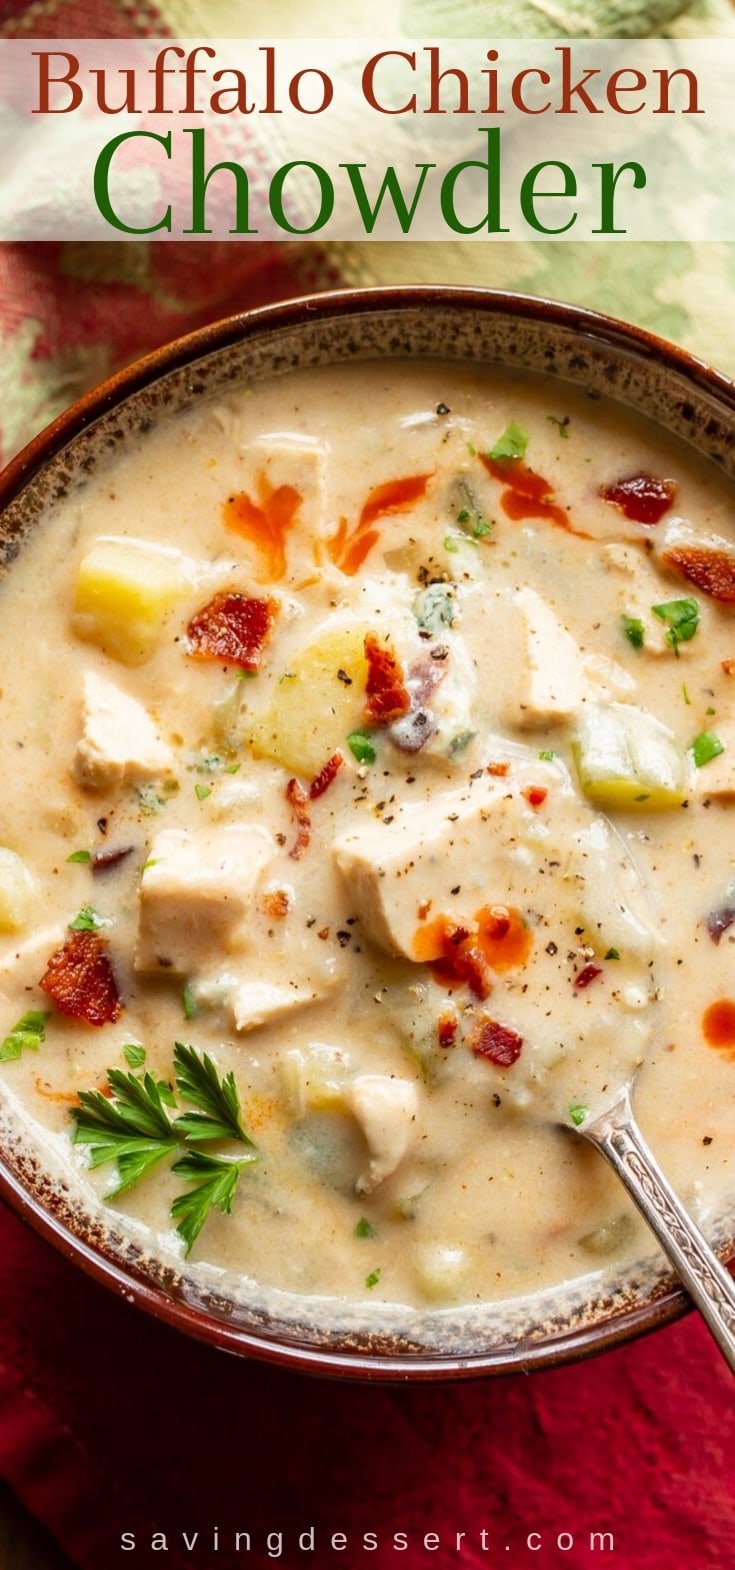 An overview view of a bowl of Buffalo chicken chowder garnished with bacon and hot sauce